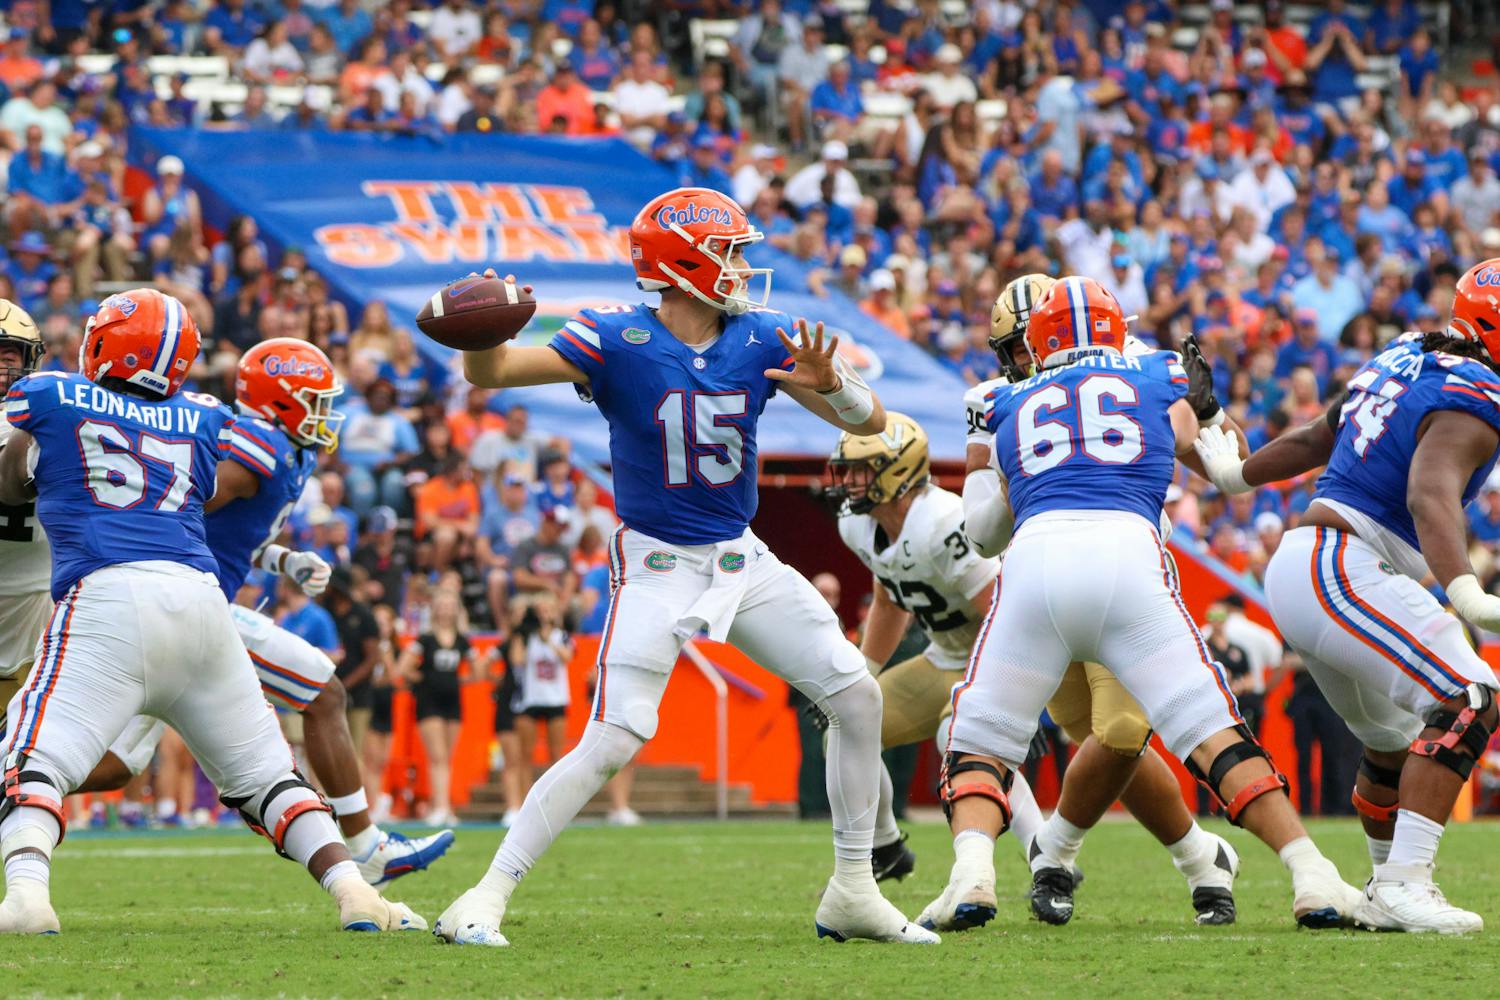 The University of Florida Gators defeat Vanderbilt University 38-14 at Ben Hill Griffin Stadium on Oct. 7, 2023. The Gators defeated the Gamecocks in its last home game 38-6 on Nov. 12, 2022.